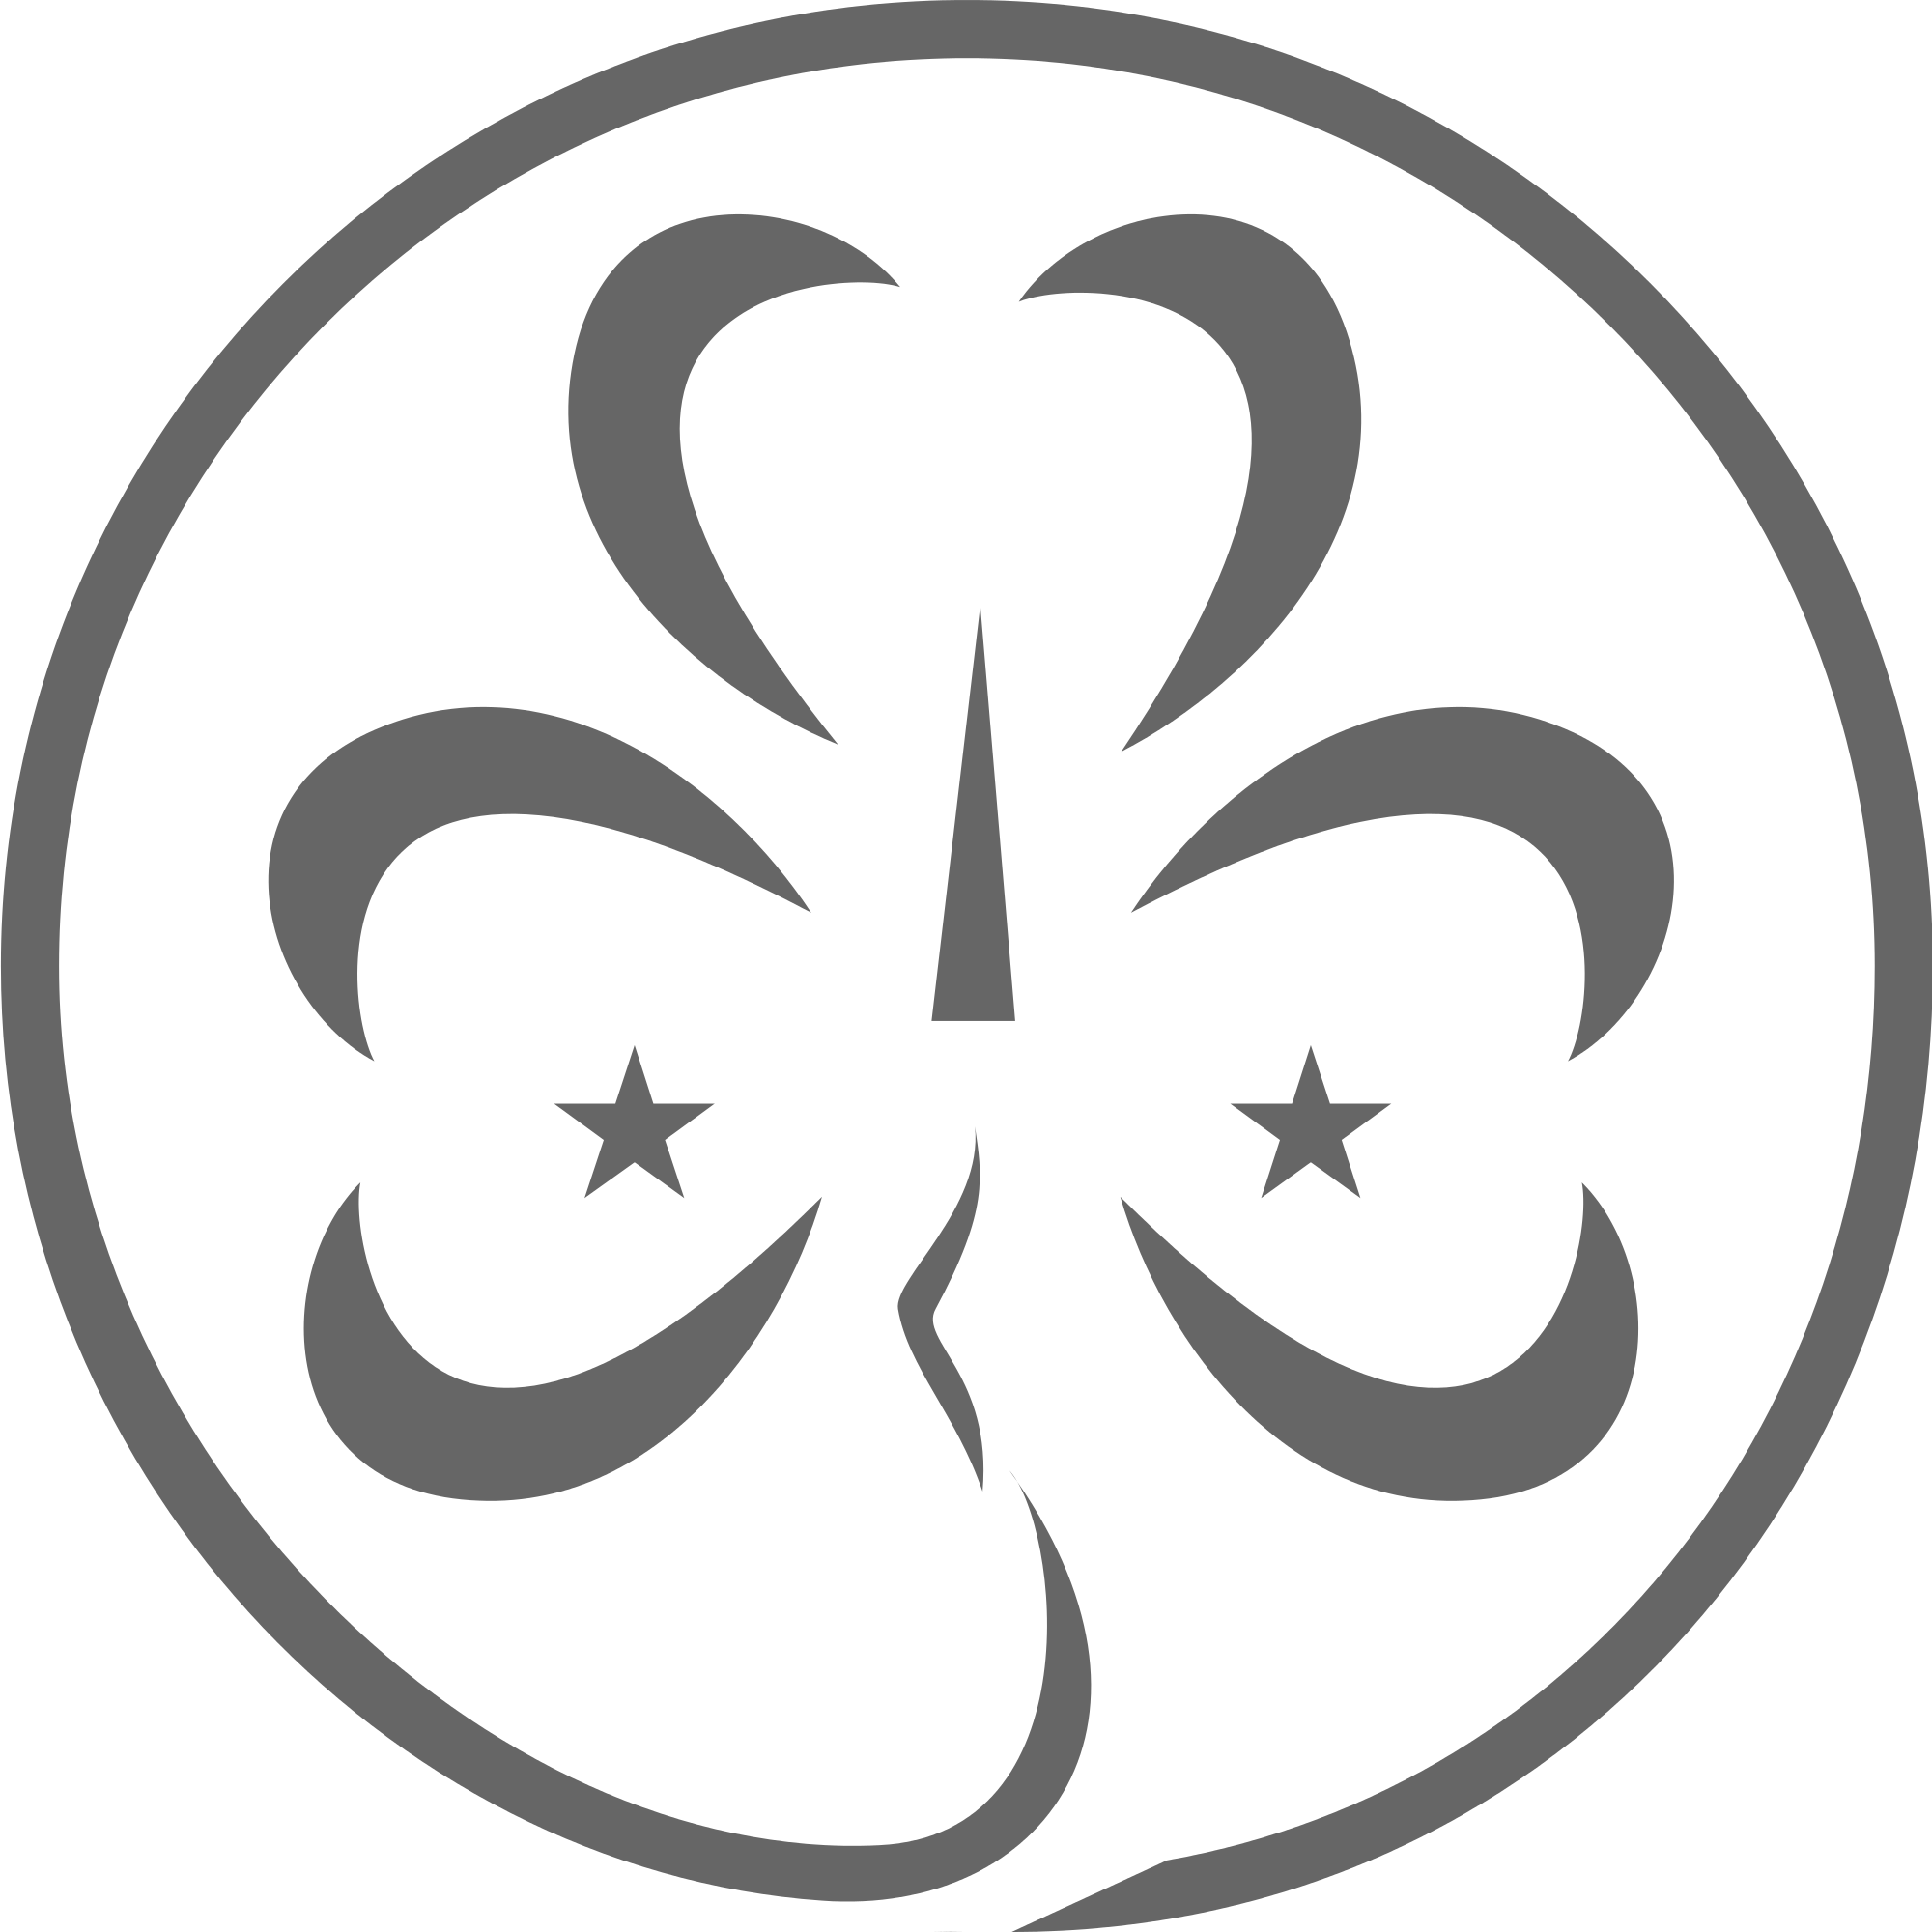 Filewikiproject Scouting Trefoil Greyscale - World Association Of Girl Guides And Girl Scouts (2000x2000)